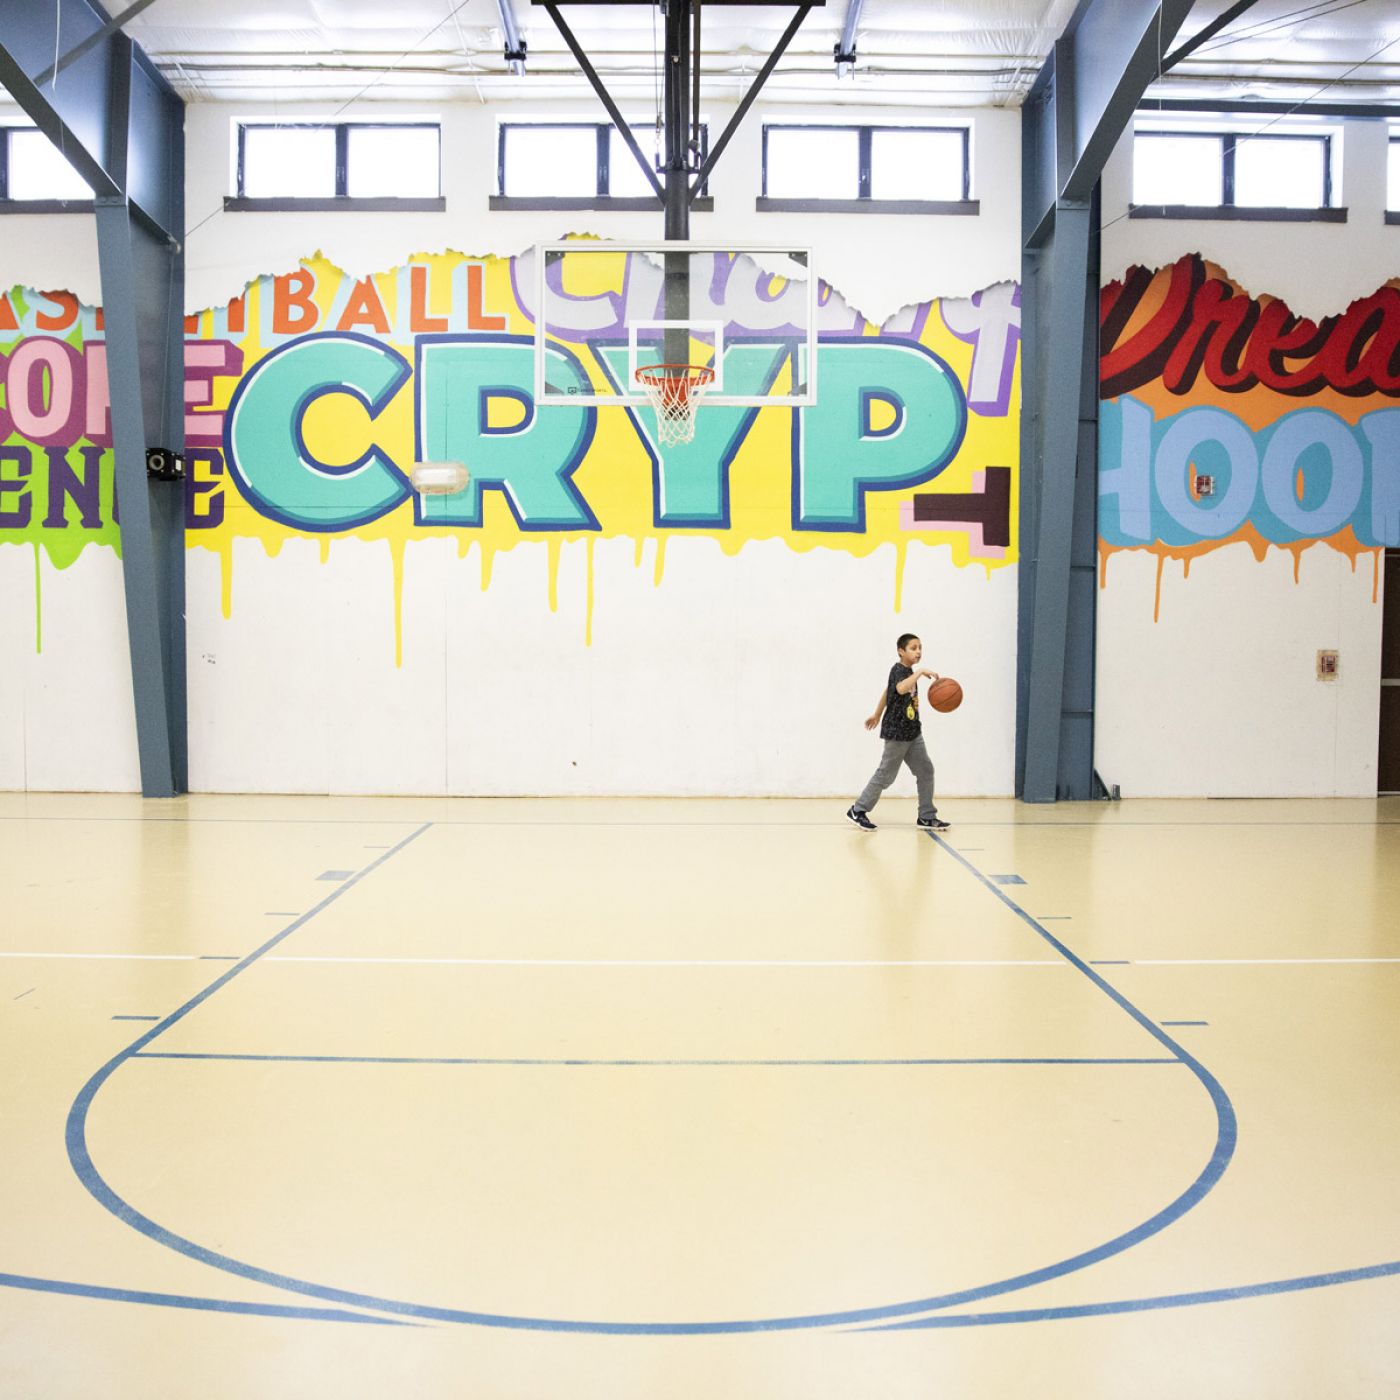 Boy bouncing basketball in a gym with colorful, expressive graffiti on walls